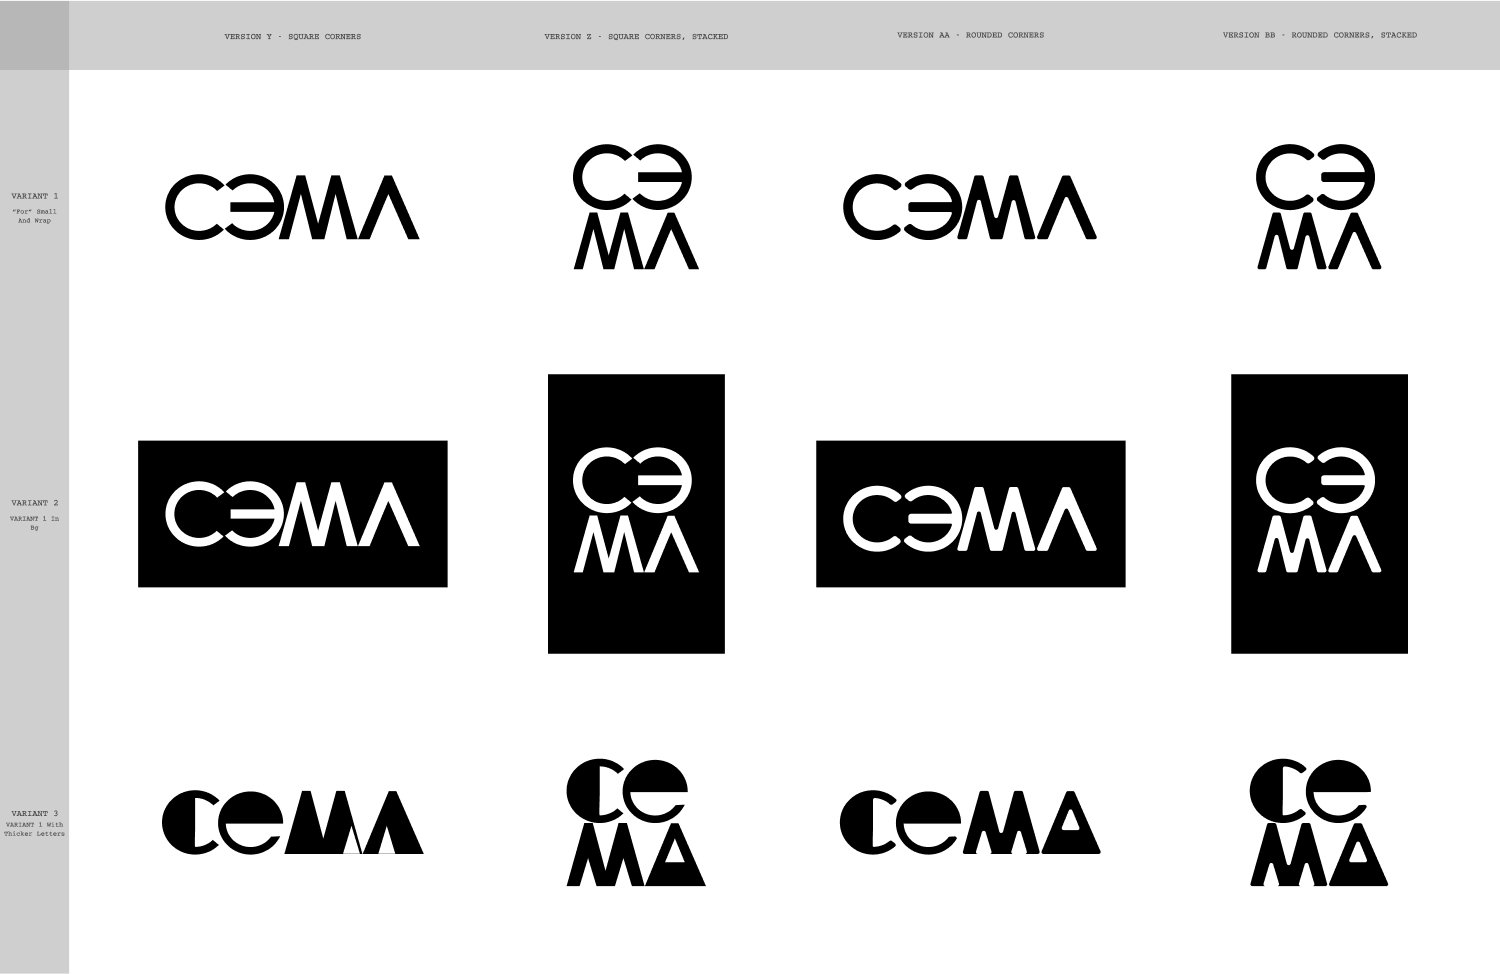  These were part of the second round of iterations. Here, we started exploring versions on dark and light, and continued to experiment with the overall aesthetic of the main acronym. 